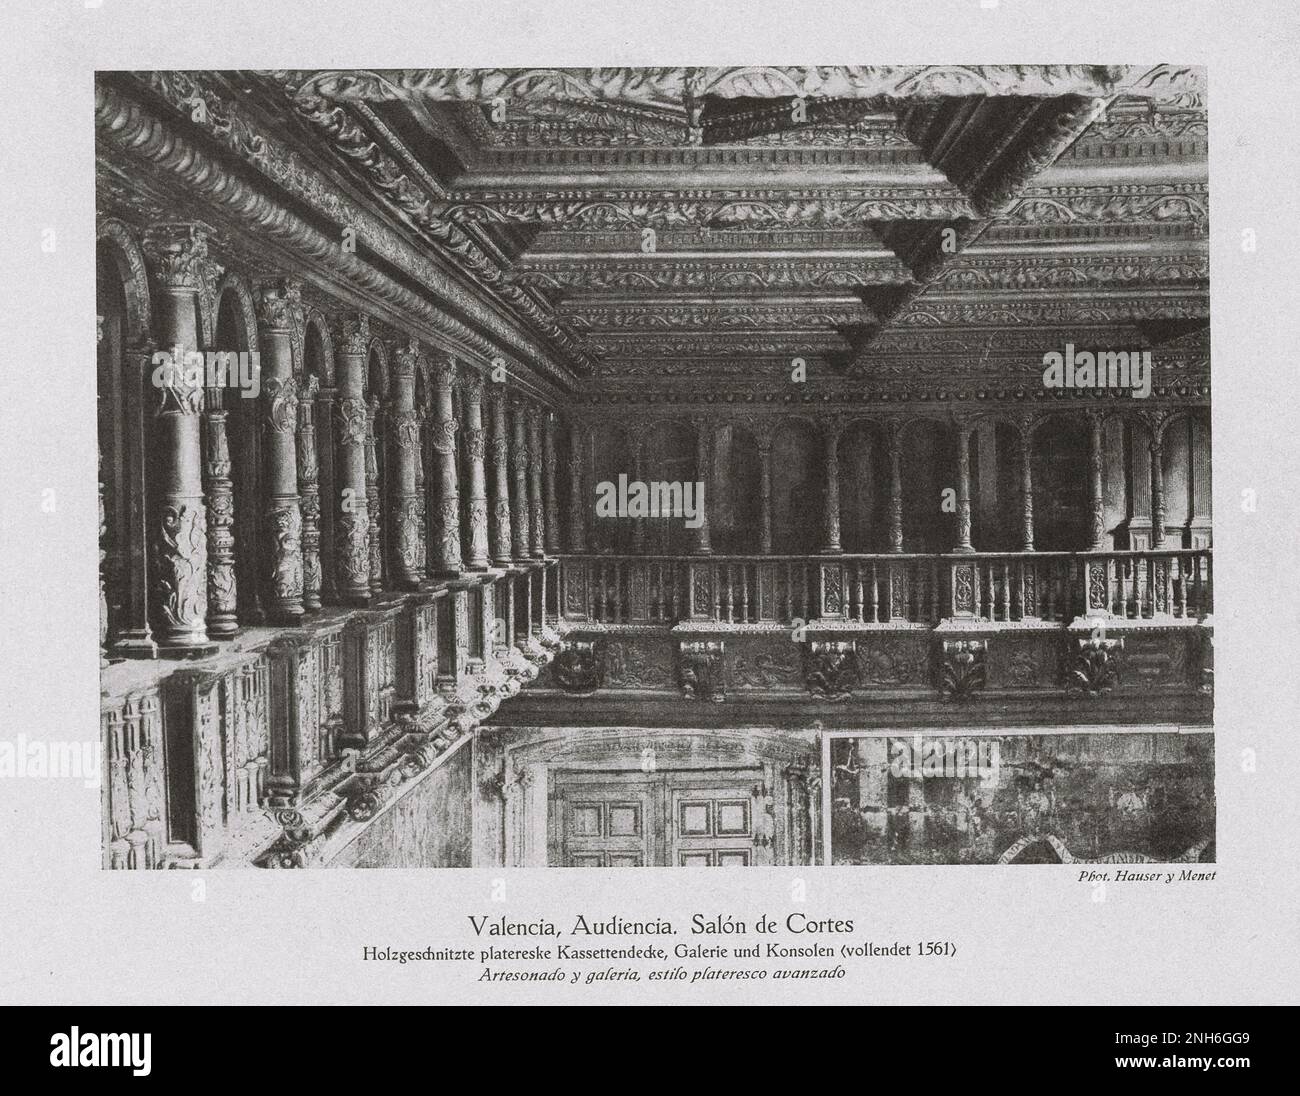 Architecture of Old Spain. Vintage photo of Audiencia de Valenci (Real Audiencia de Valencia ), Salon de Cortes. Valencia Coffered ceiling and gallery, advanced pateresque style Stock Photo